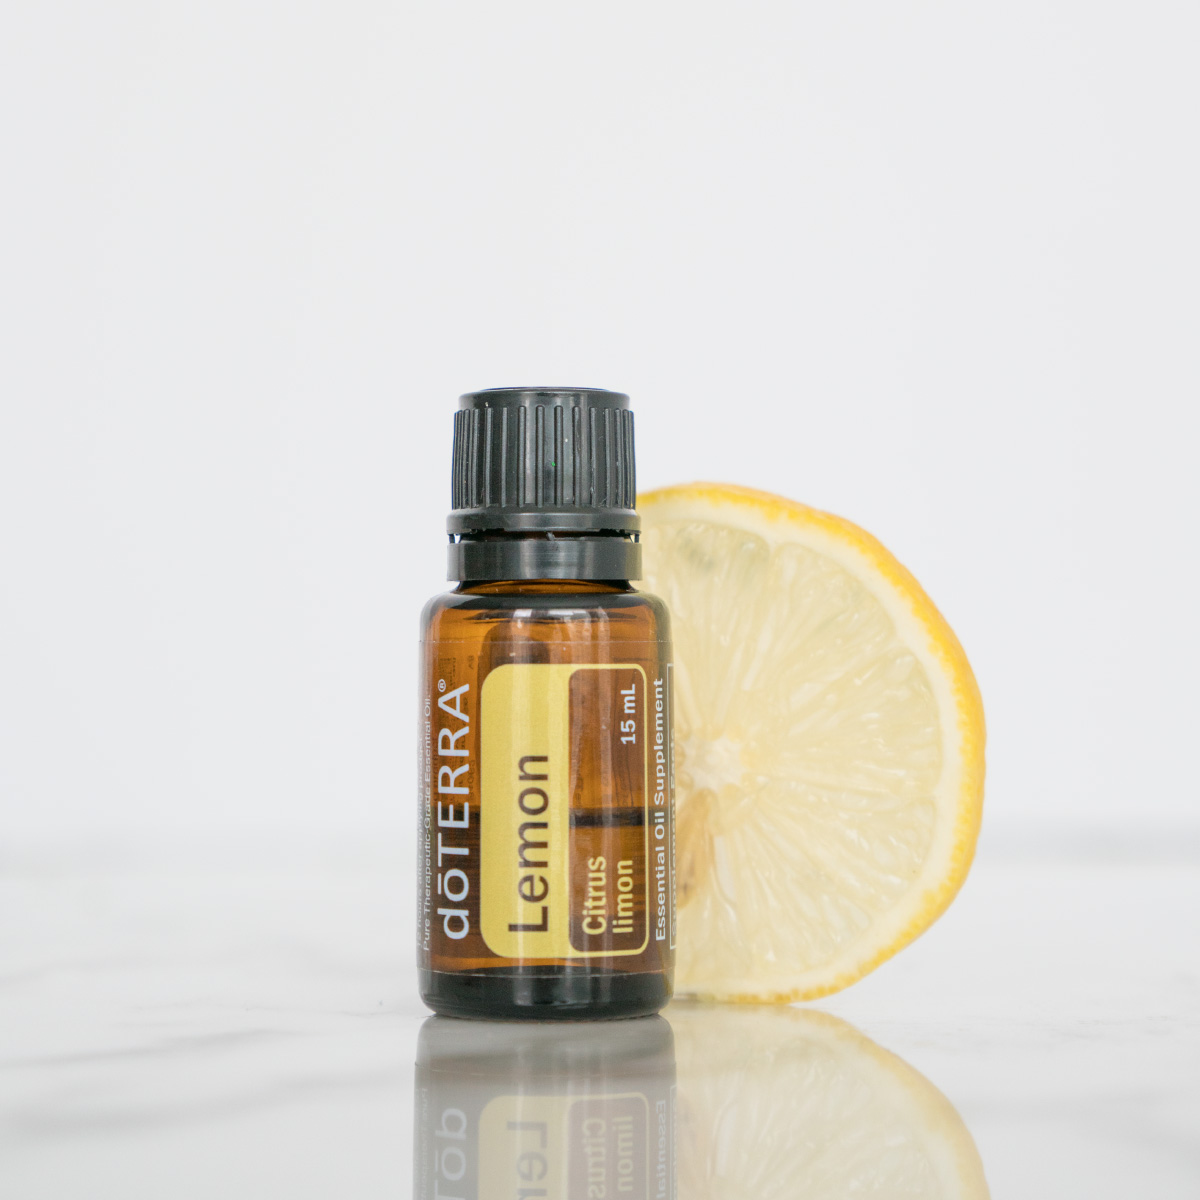 Bottle of Lemon oil next to fresh lemon slice. How can I use Lemon oil? Lemon essential oil can be used to clean surfaces around the home, to aid in digestion, and to uplift the mood.